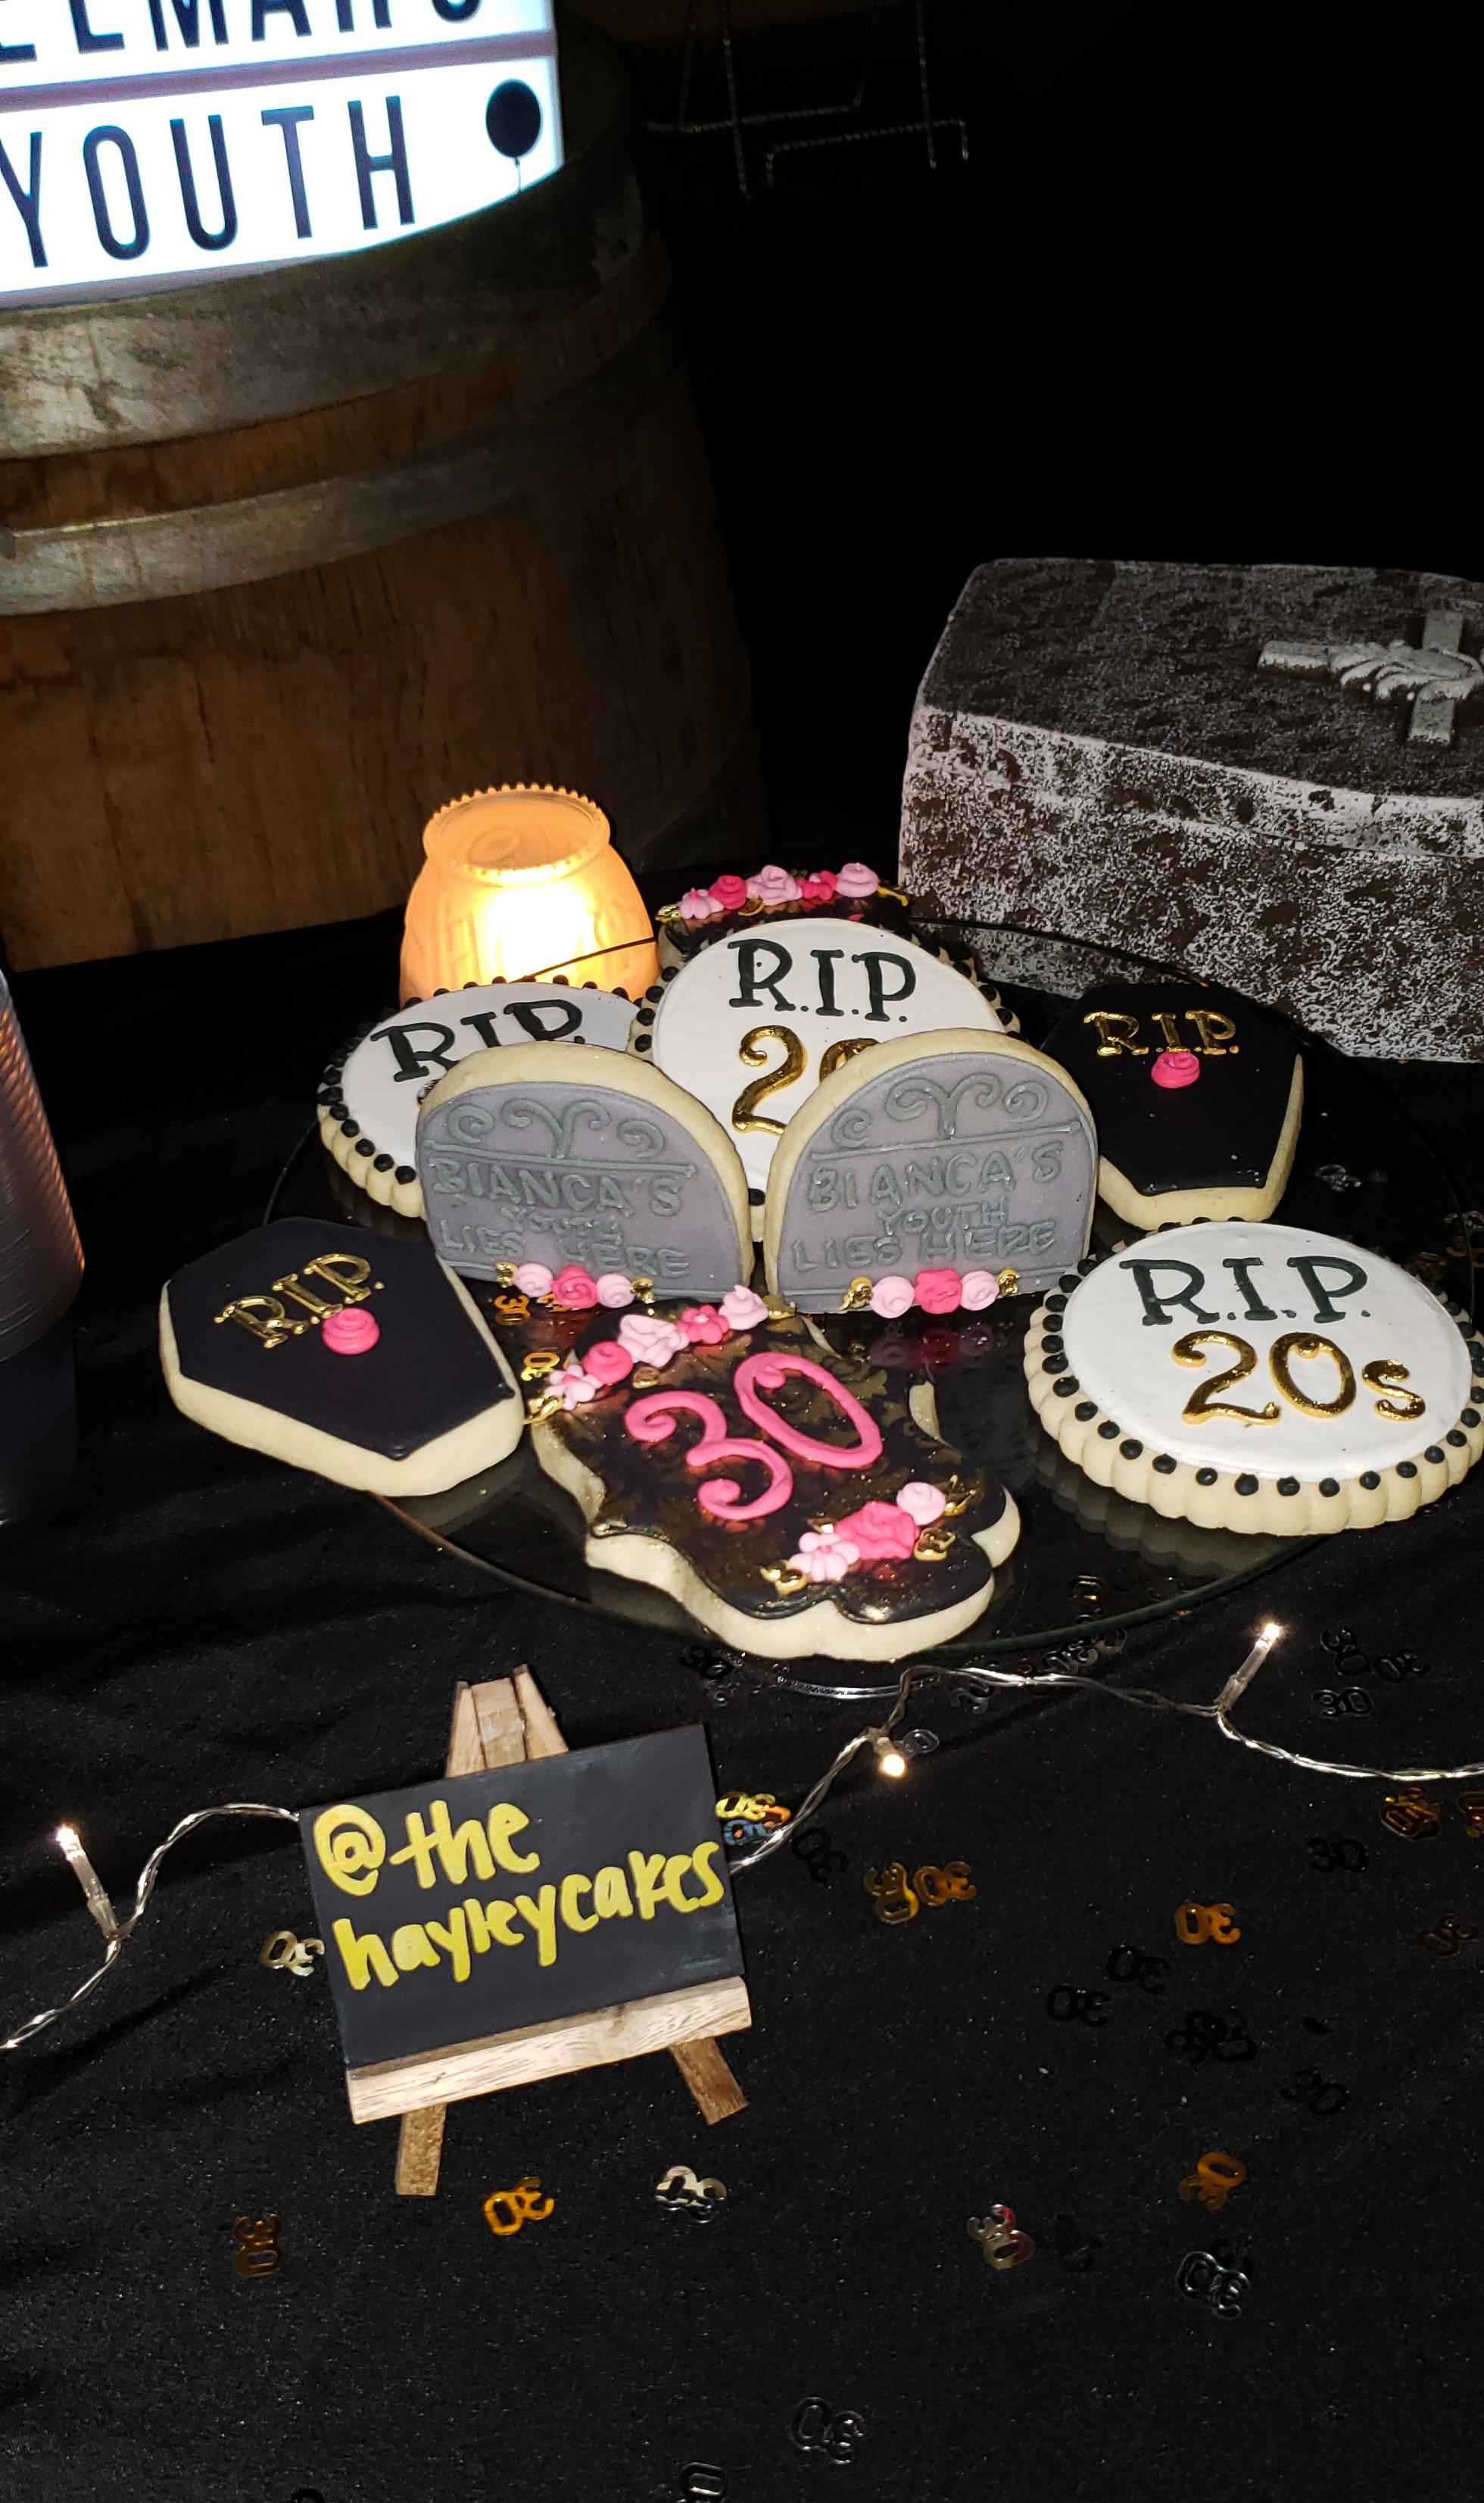 How to Host a Death to my Youth Funeral with 30th Party Ideas